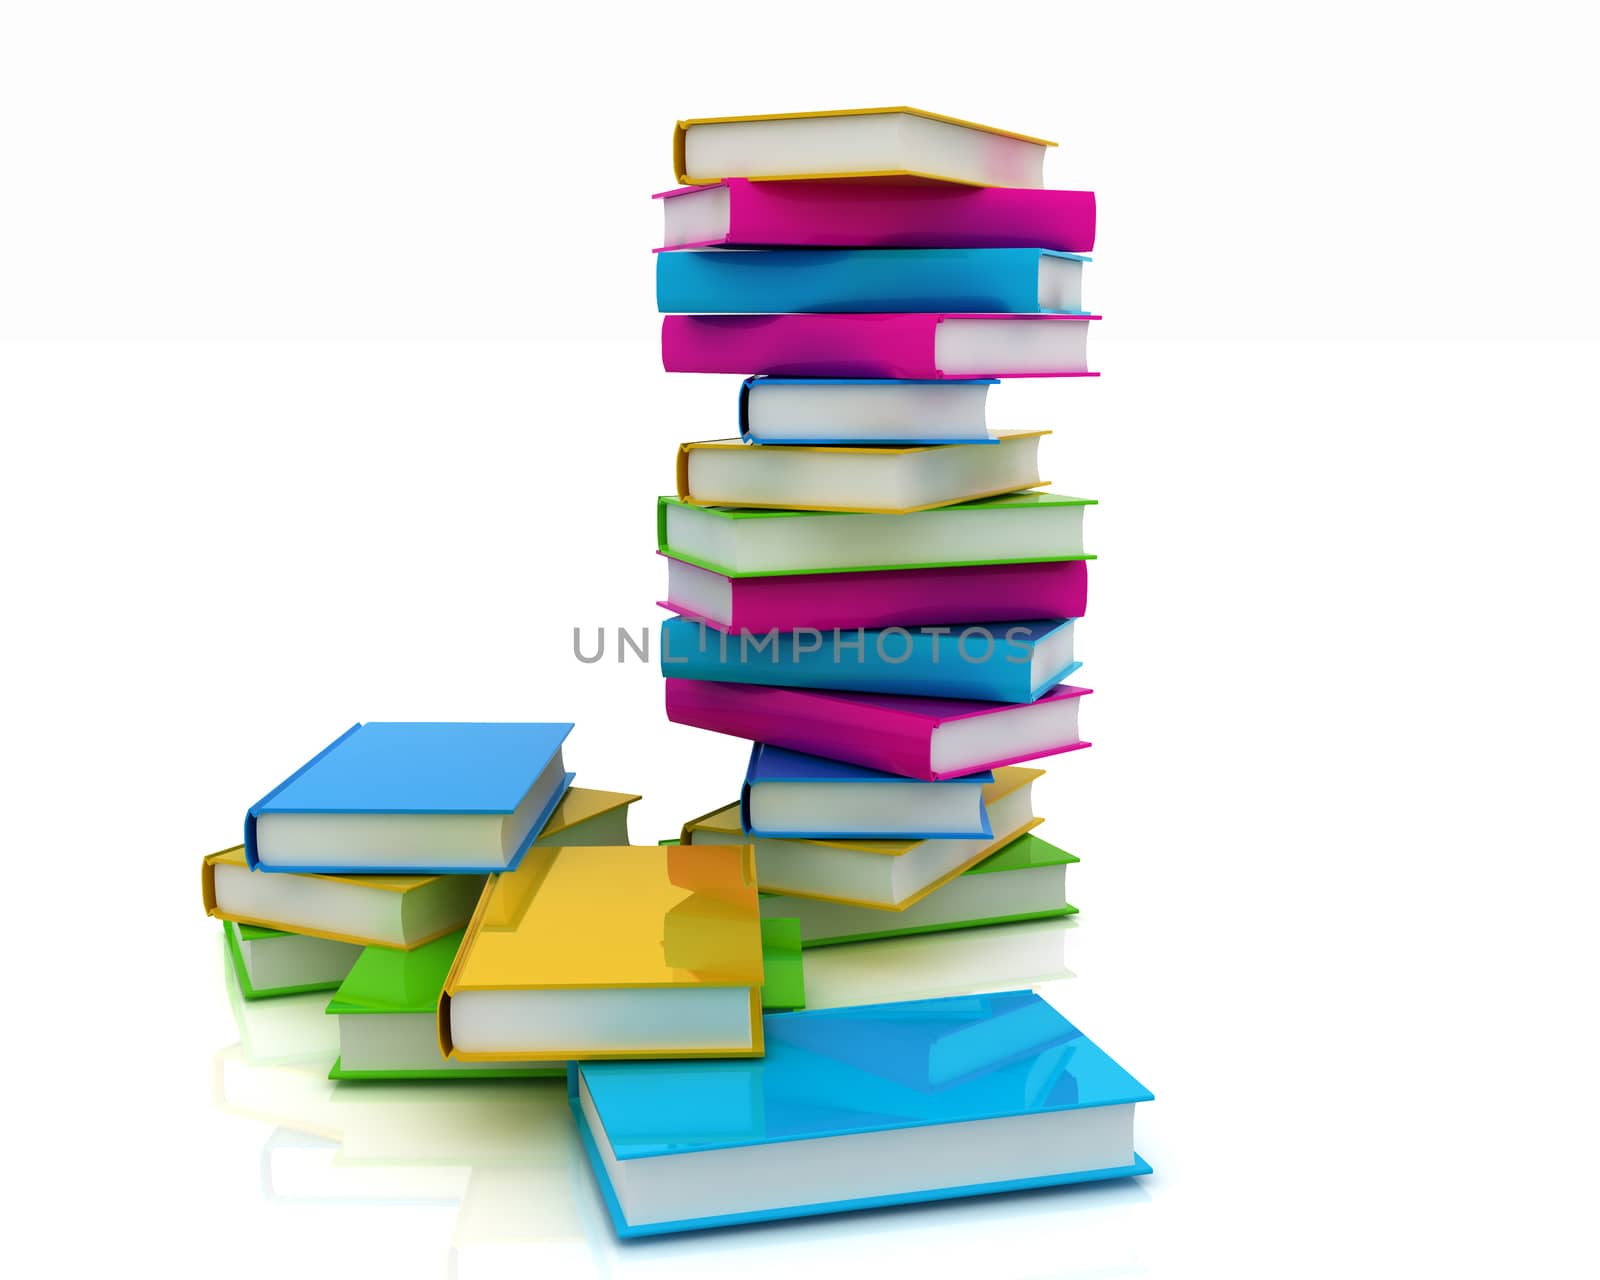 Colorful real books on white background 